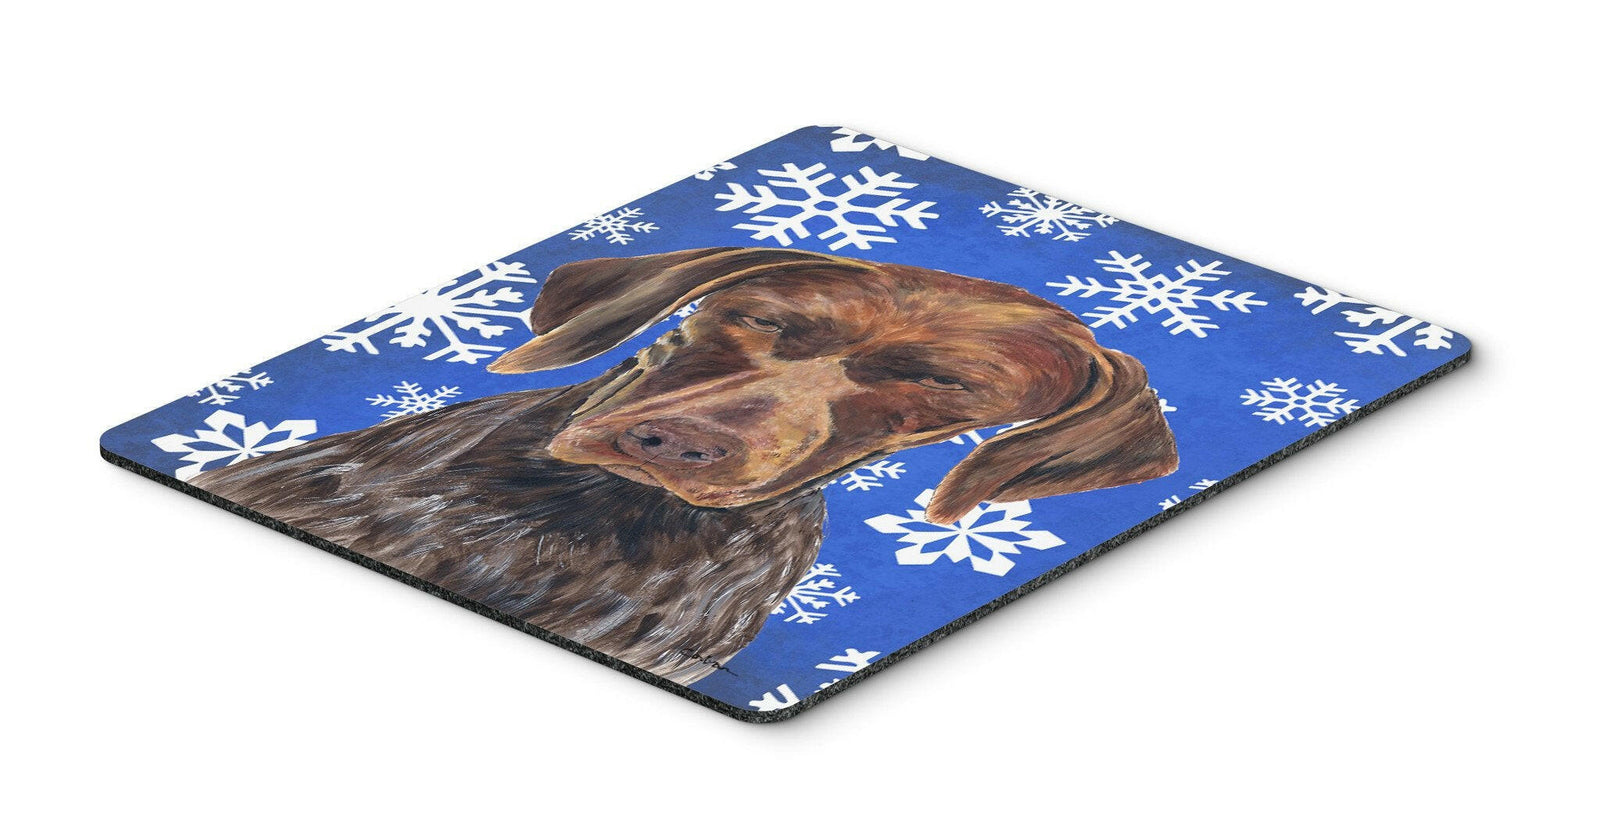 German Shorthaired Pointer Winter Snowflakes Mouse Pad, Hot Pad or Trivet by Caroline's Treasures